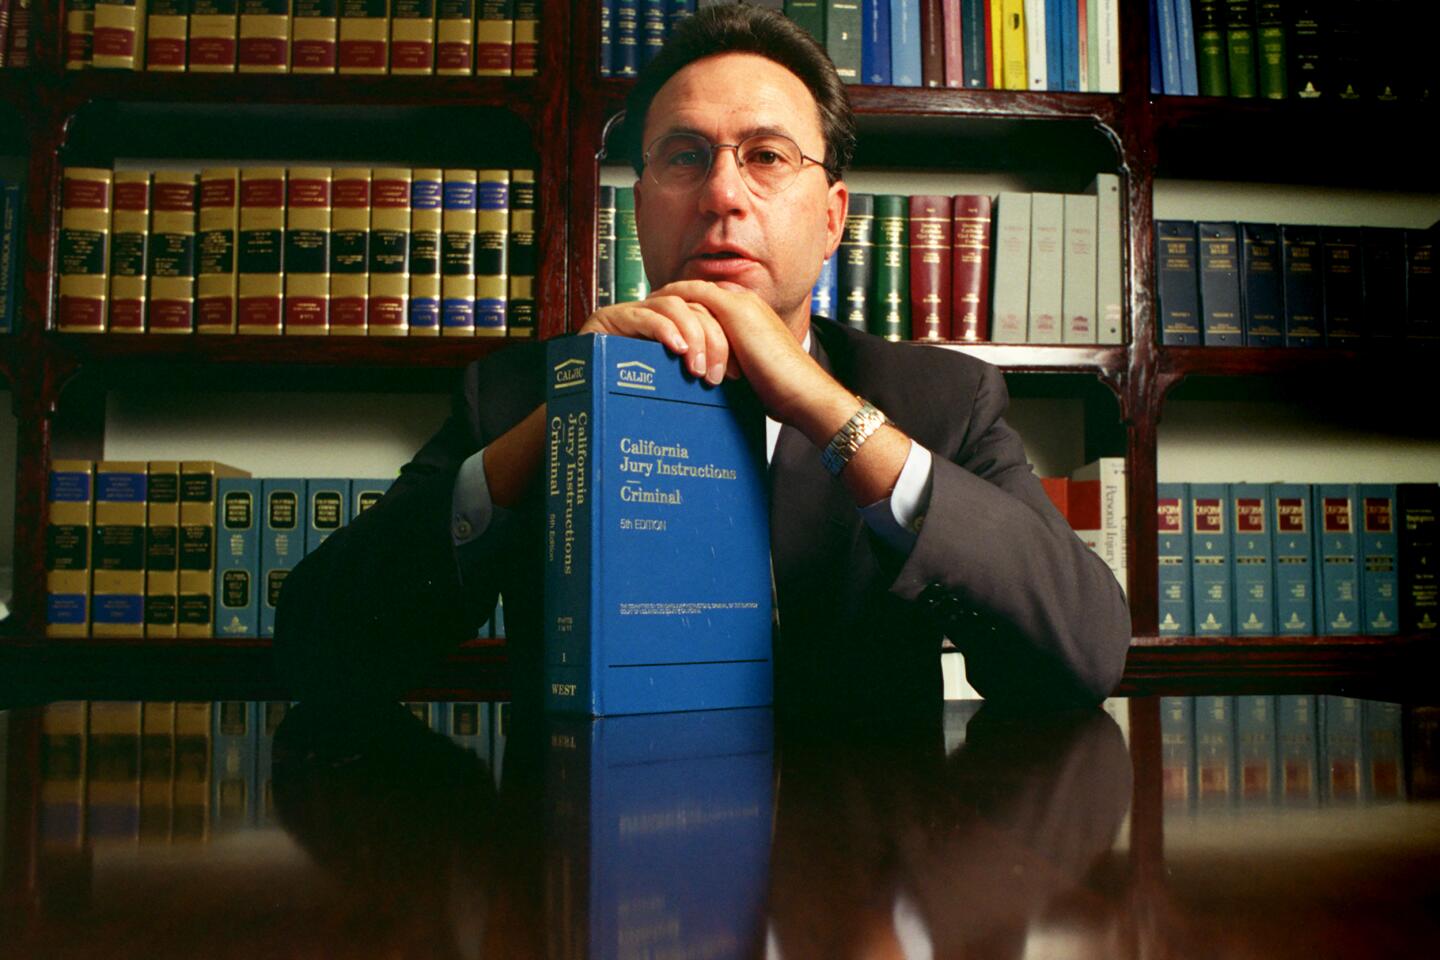 Jack Earley, one of the top criminal defense attorneys in Orange County, is shown in his Irvine law library. Among his high-profile clients is Betty Broderick.